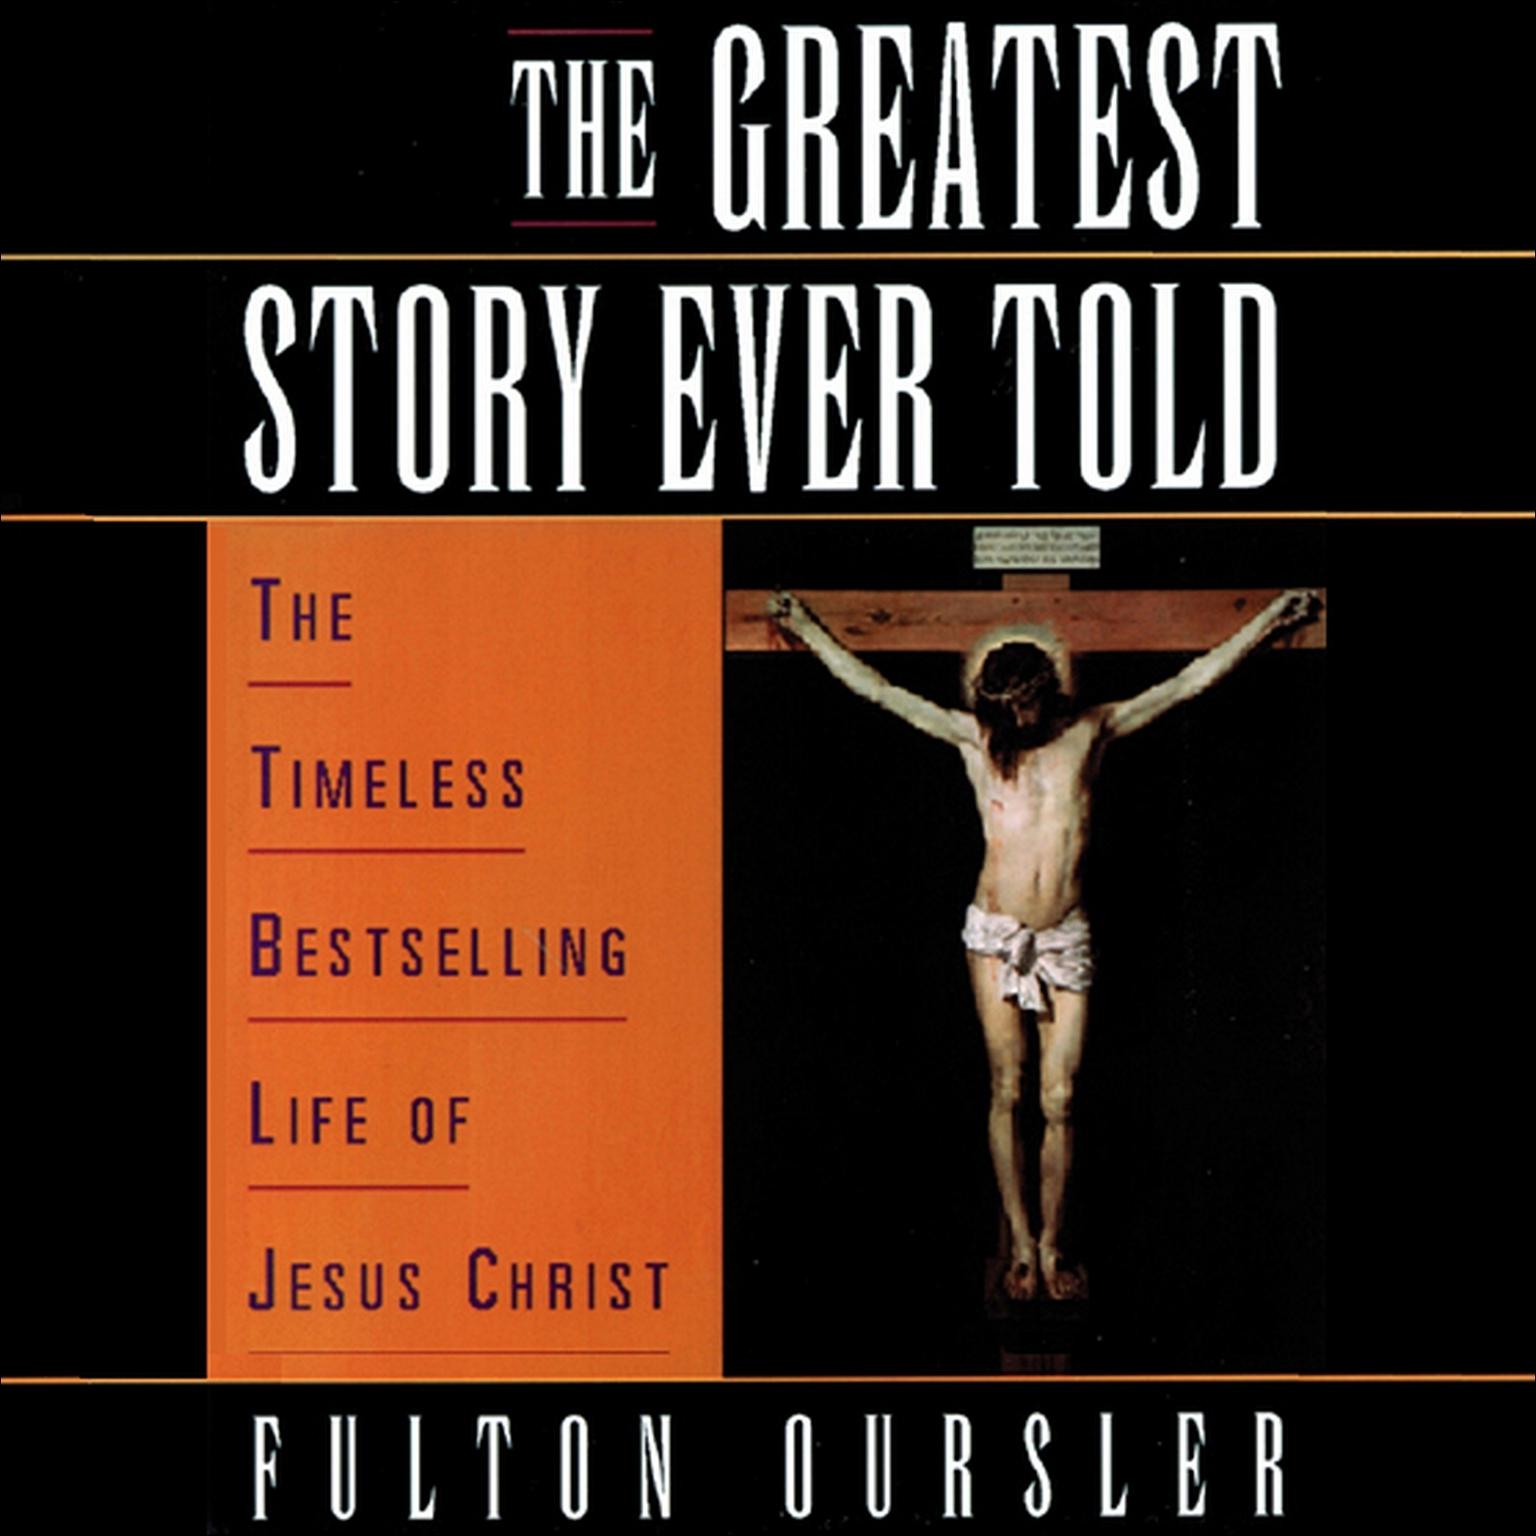 The Greatest Story Ever Told (Abridged) Audiobook, by Fulton Oursler